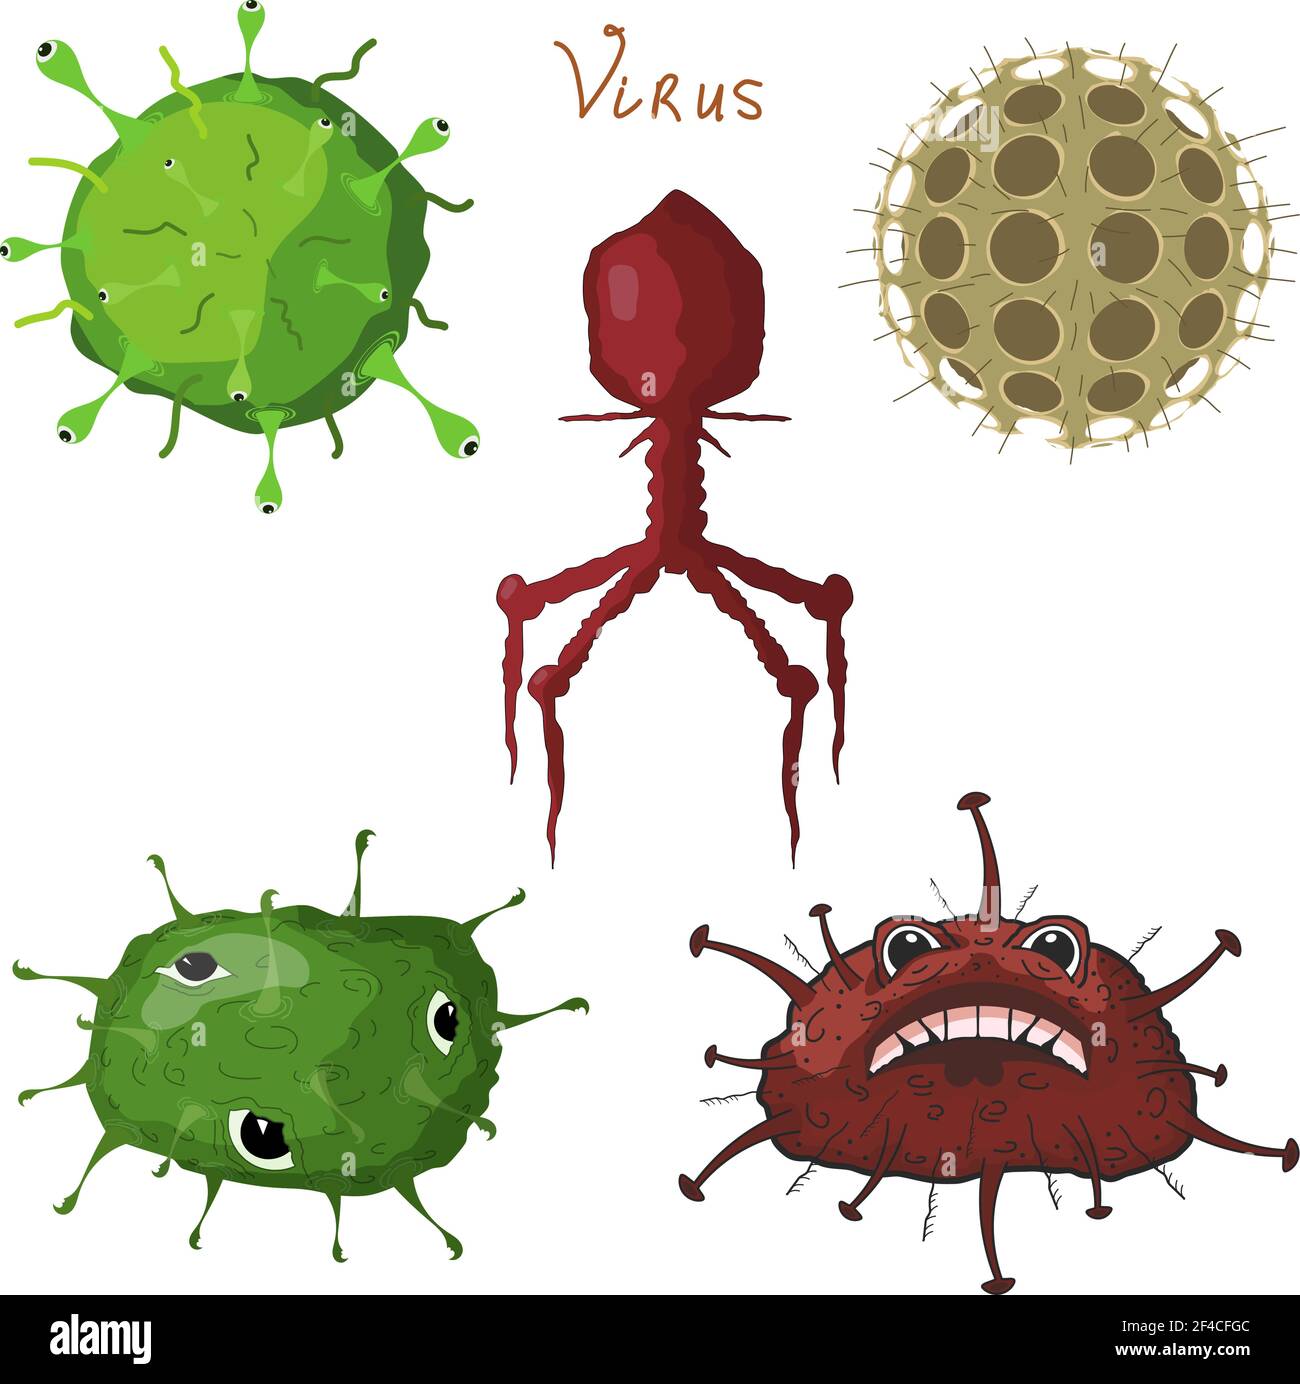 Vector illustration set of abstract bacteria and viruses. Cartoon style. Virus on a white background. Biological objects Stock Vector